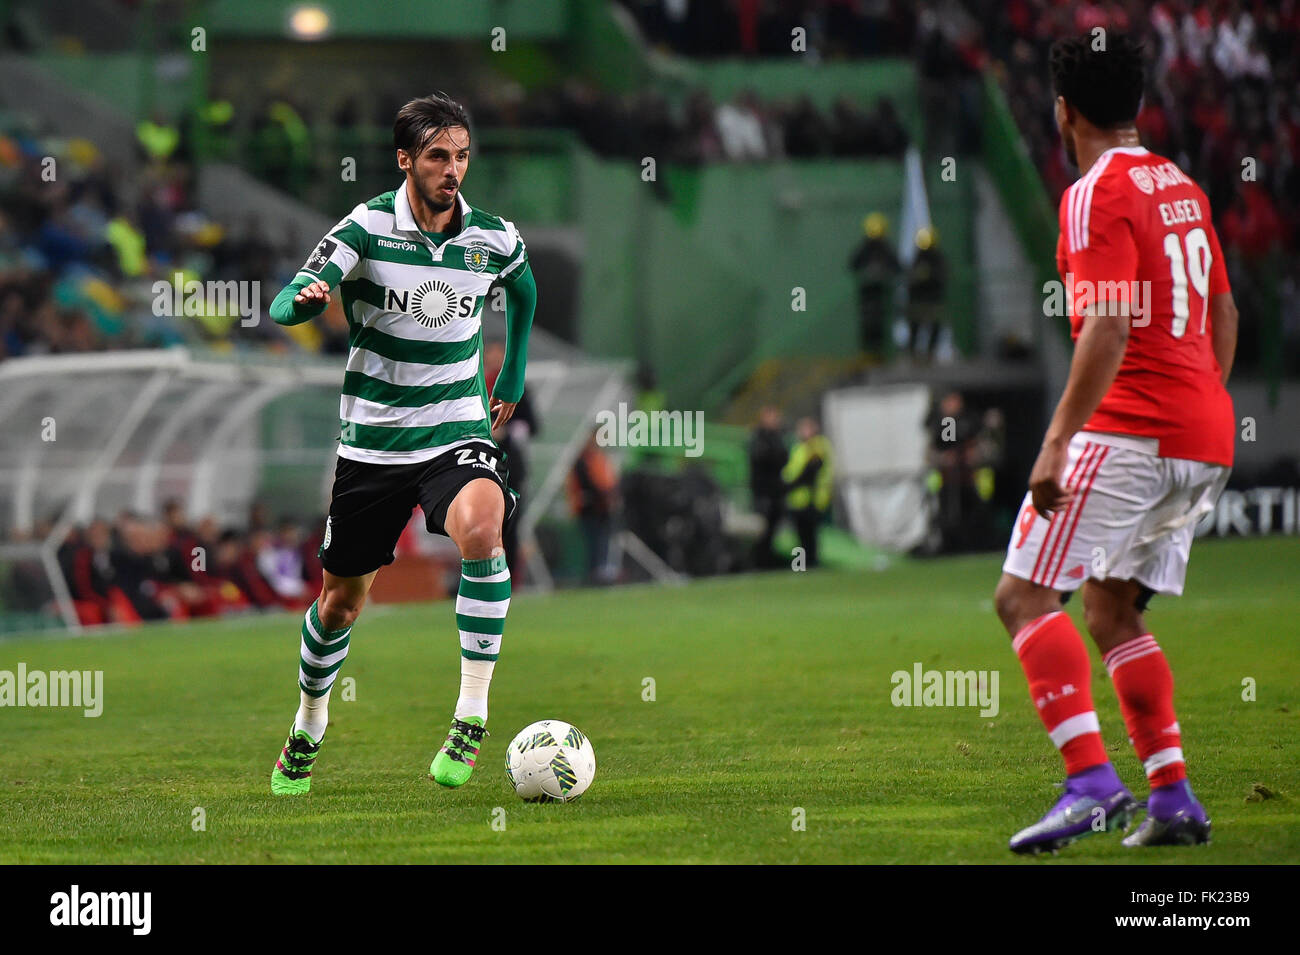 Lisbon, Portugal. 5th March, 2016.  SPORTING-BENFICA - Bryan Ruiz (L), Sporting player, and Eliseu (R), Benfica player, in action during Portuguese League football match between Sporting and Benfica held in Estádio Alvalade XXI, in Lisbon,  Portugal. Photo: Bruno de Carvalho/Alamy Live News Stock Photo